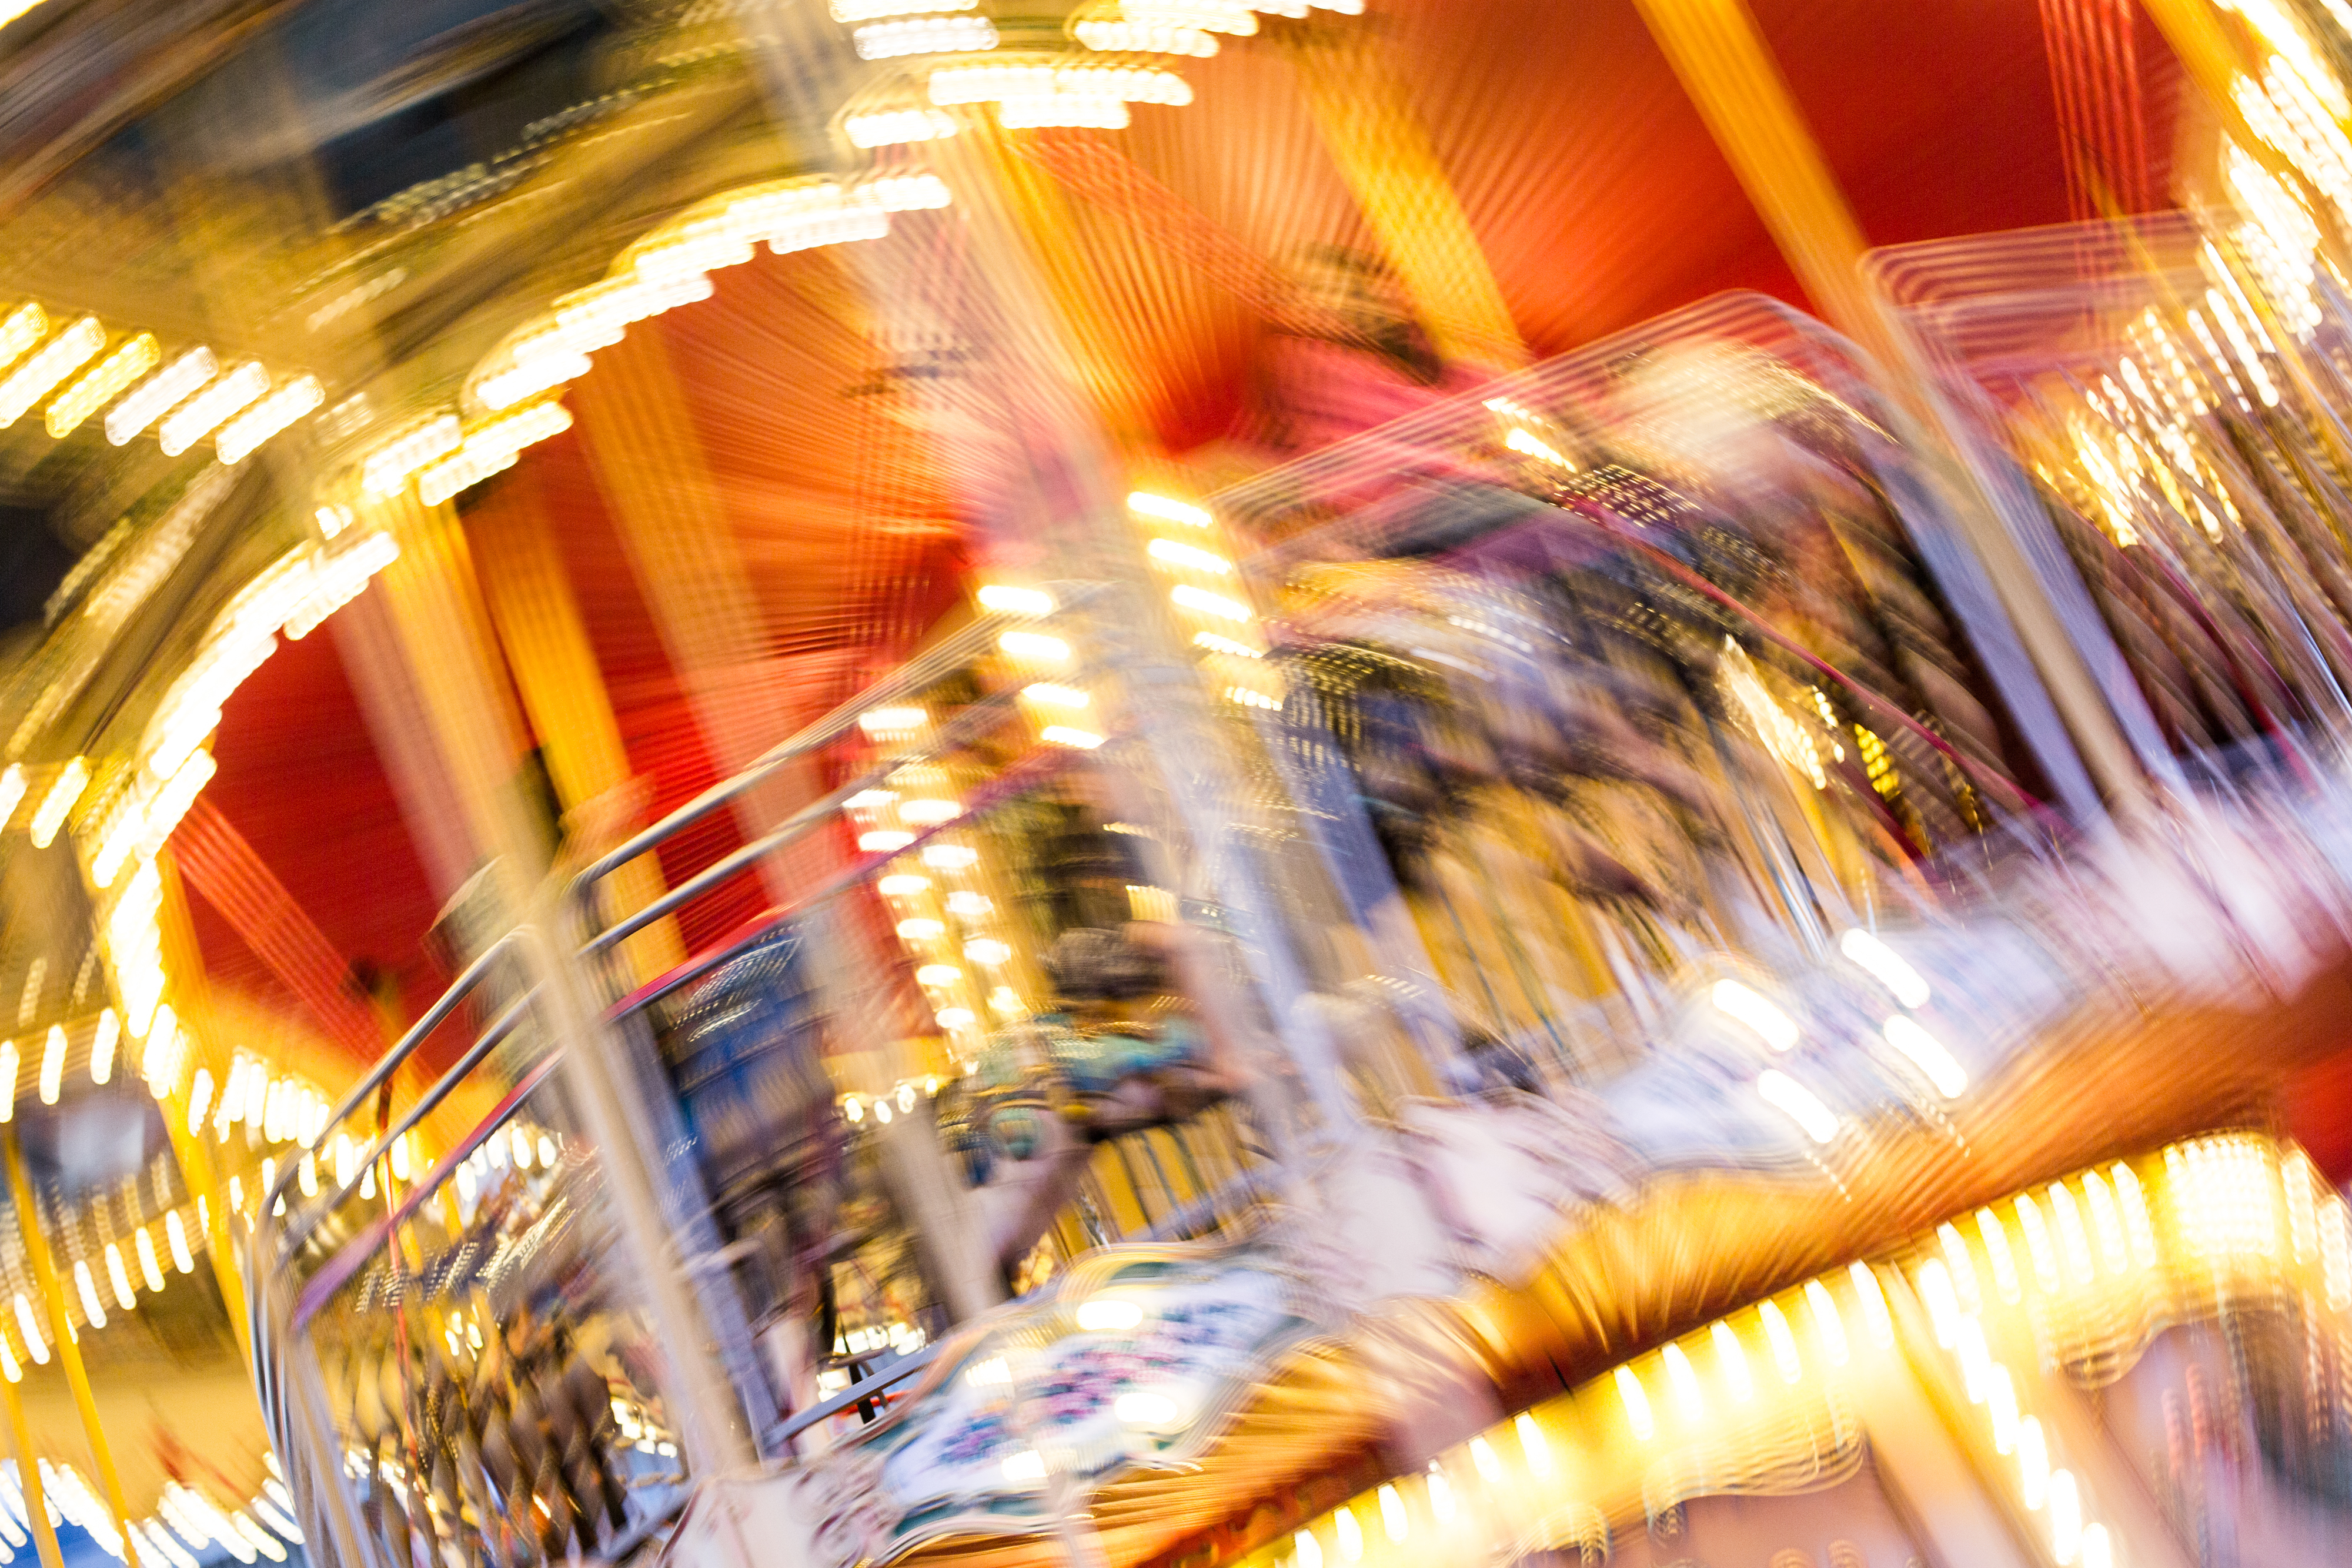 Crazy Blurred Carousel at Night Free Stock Photo